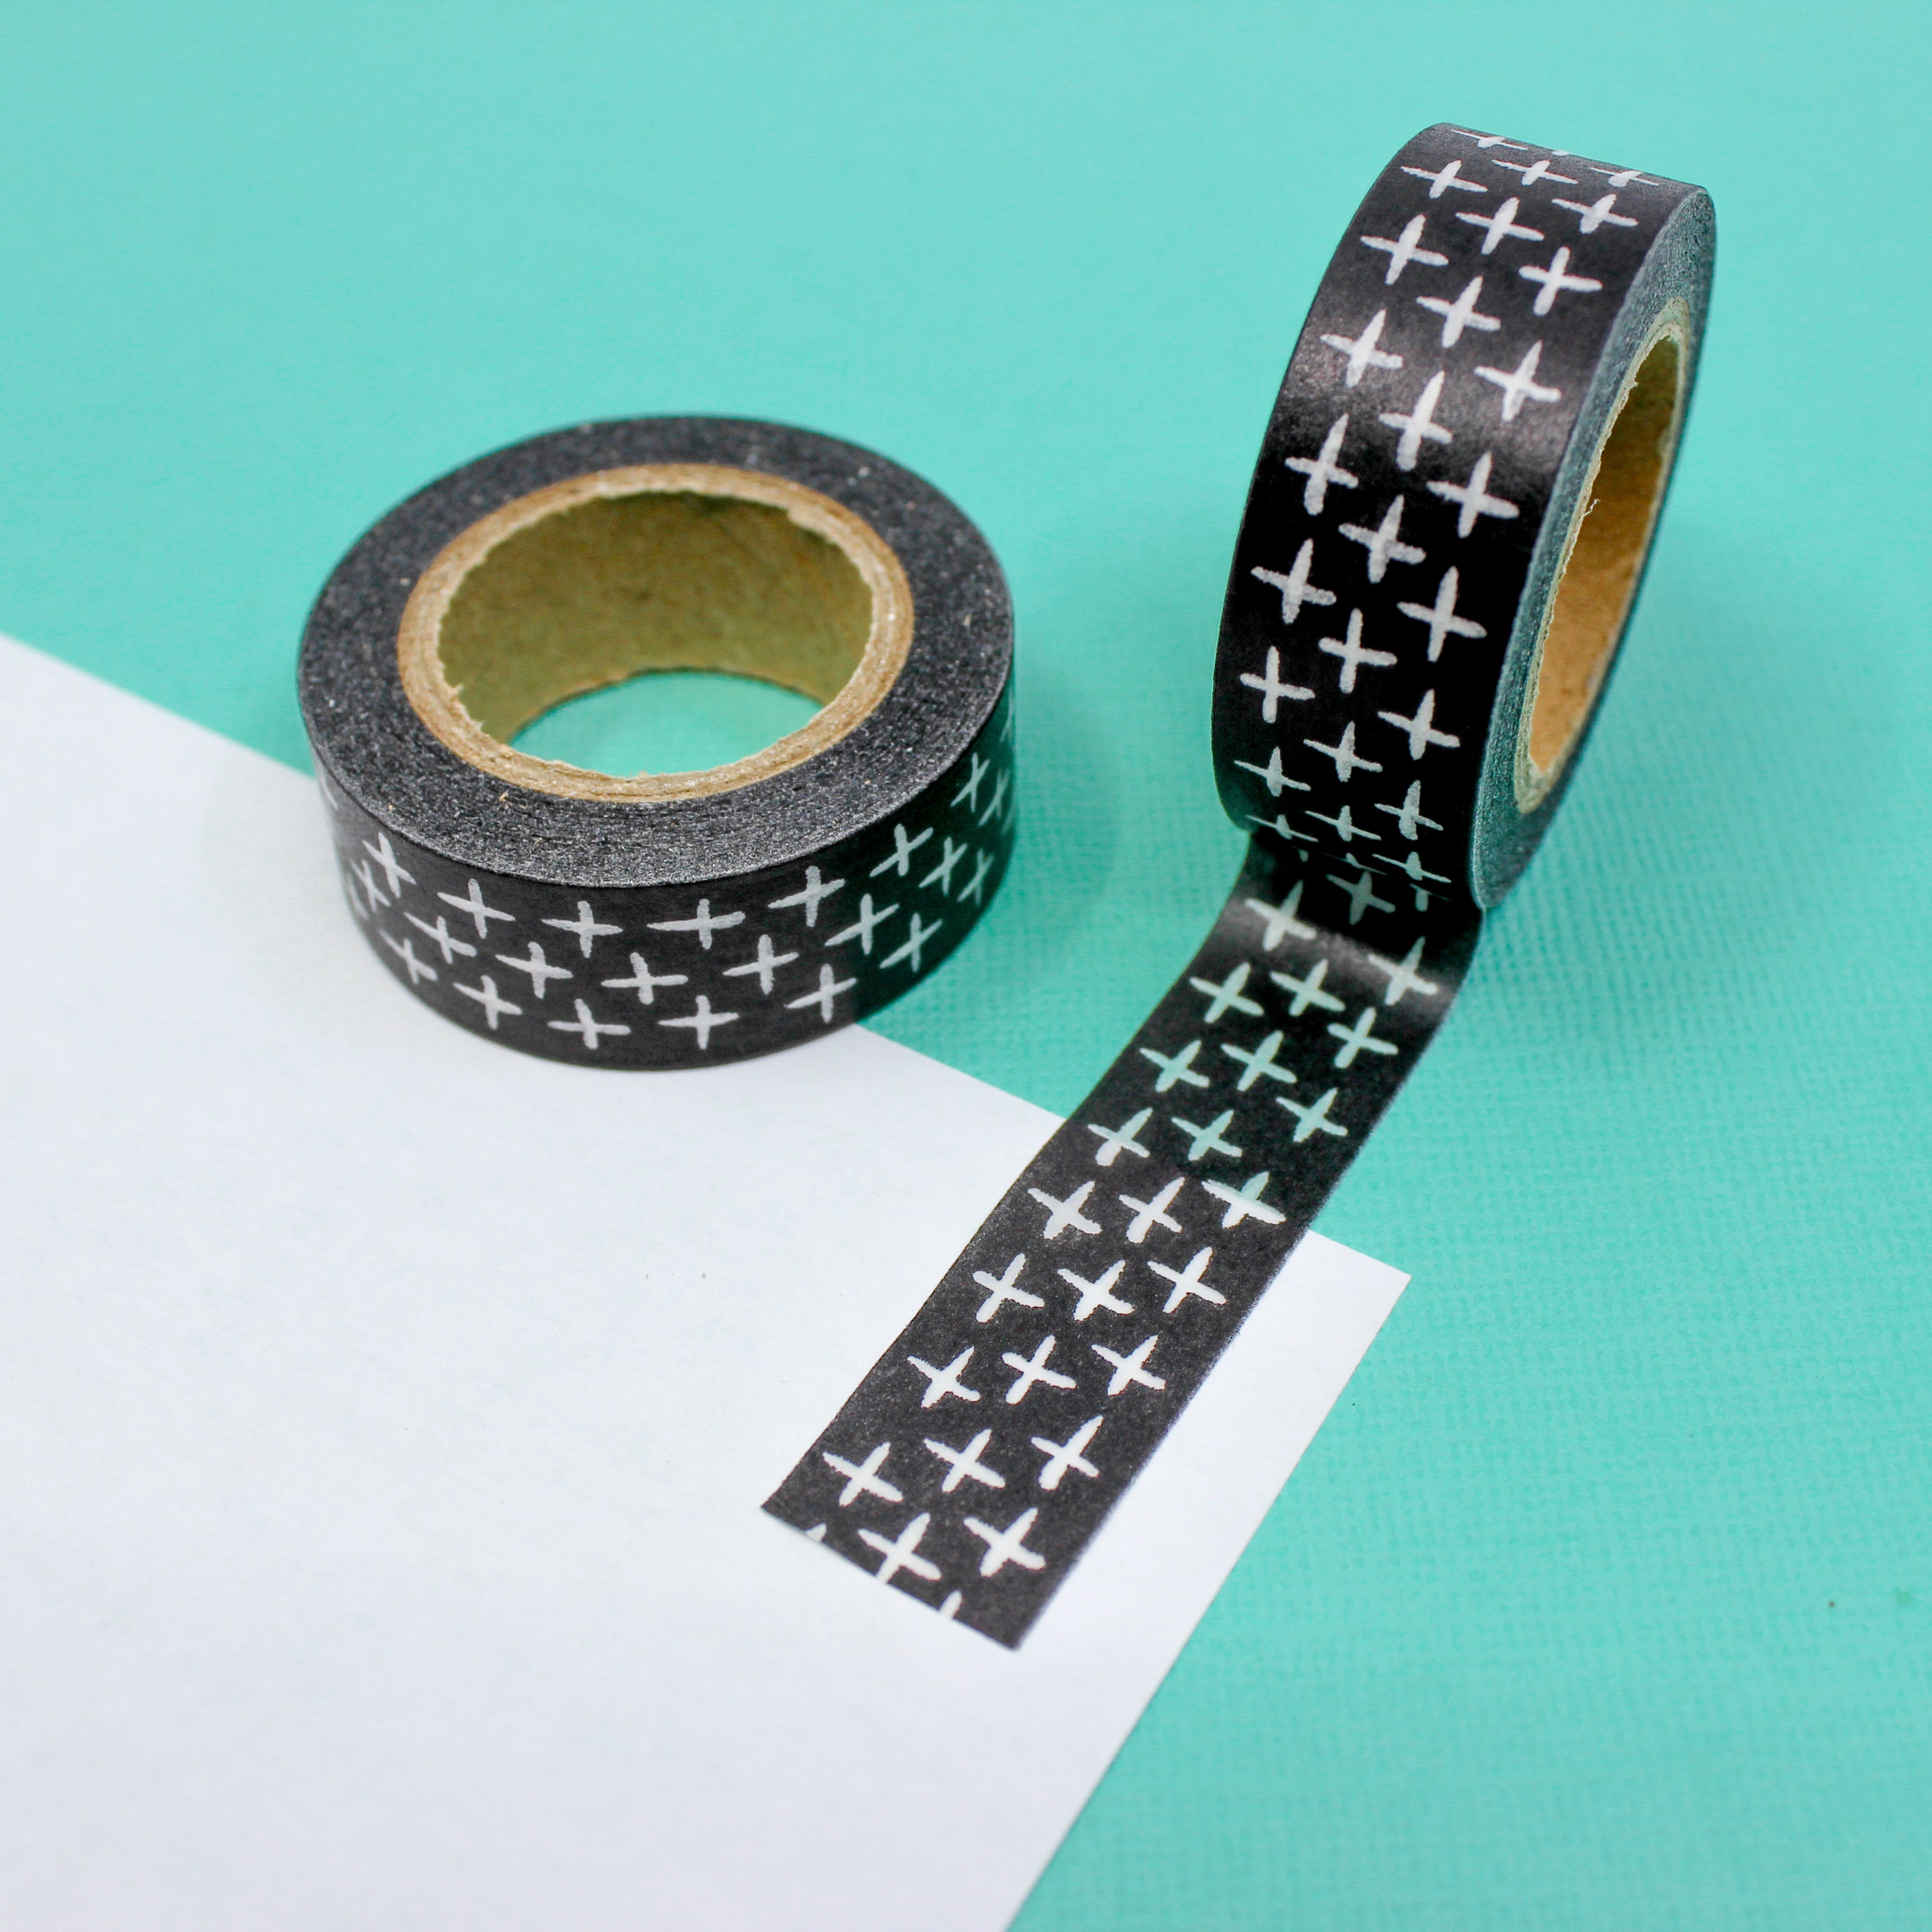 This is a black handwritten crosses washi tape from BBB Supplies Craft Shop